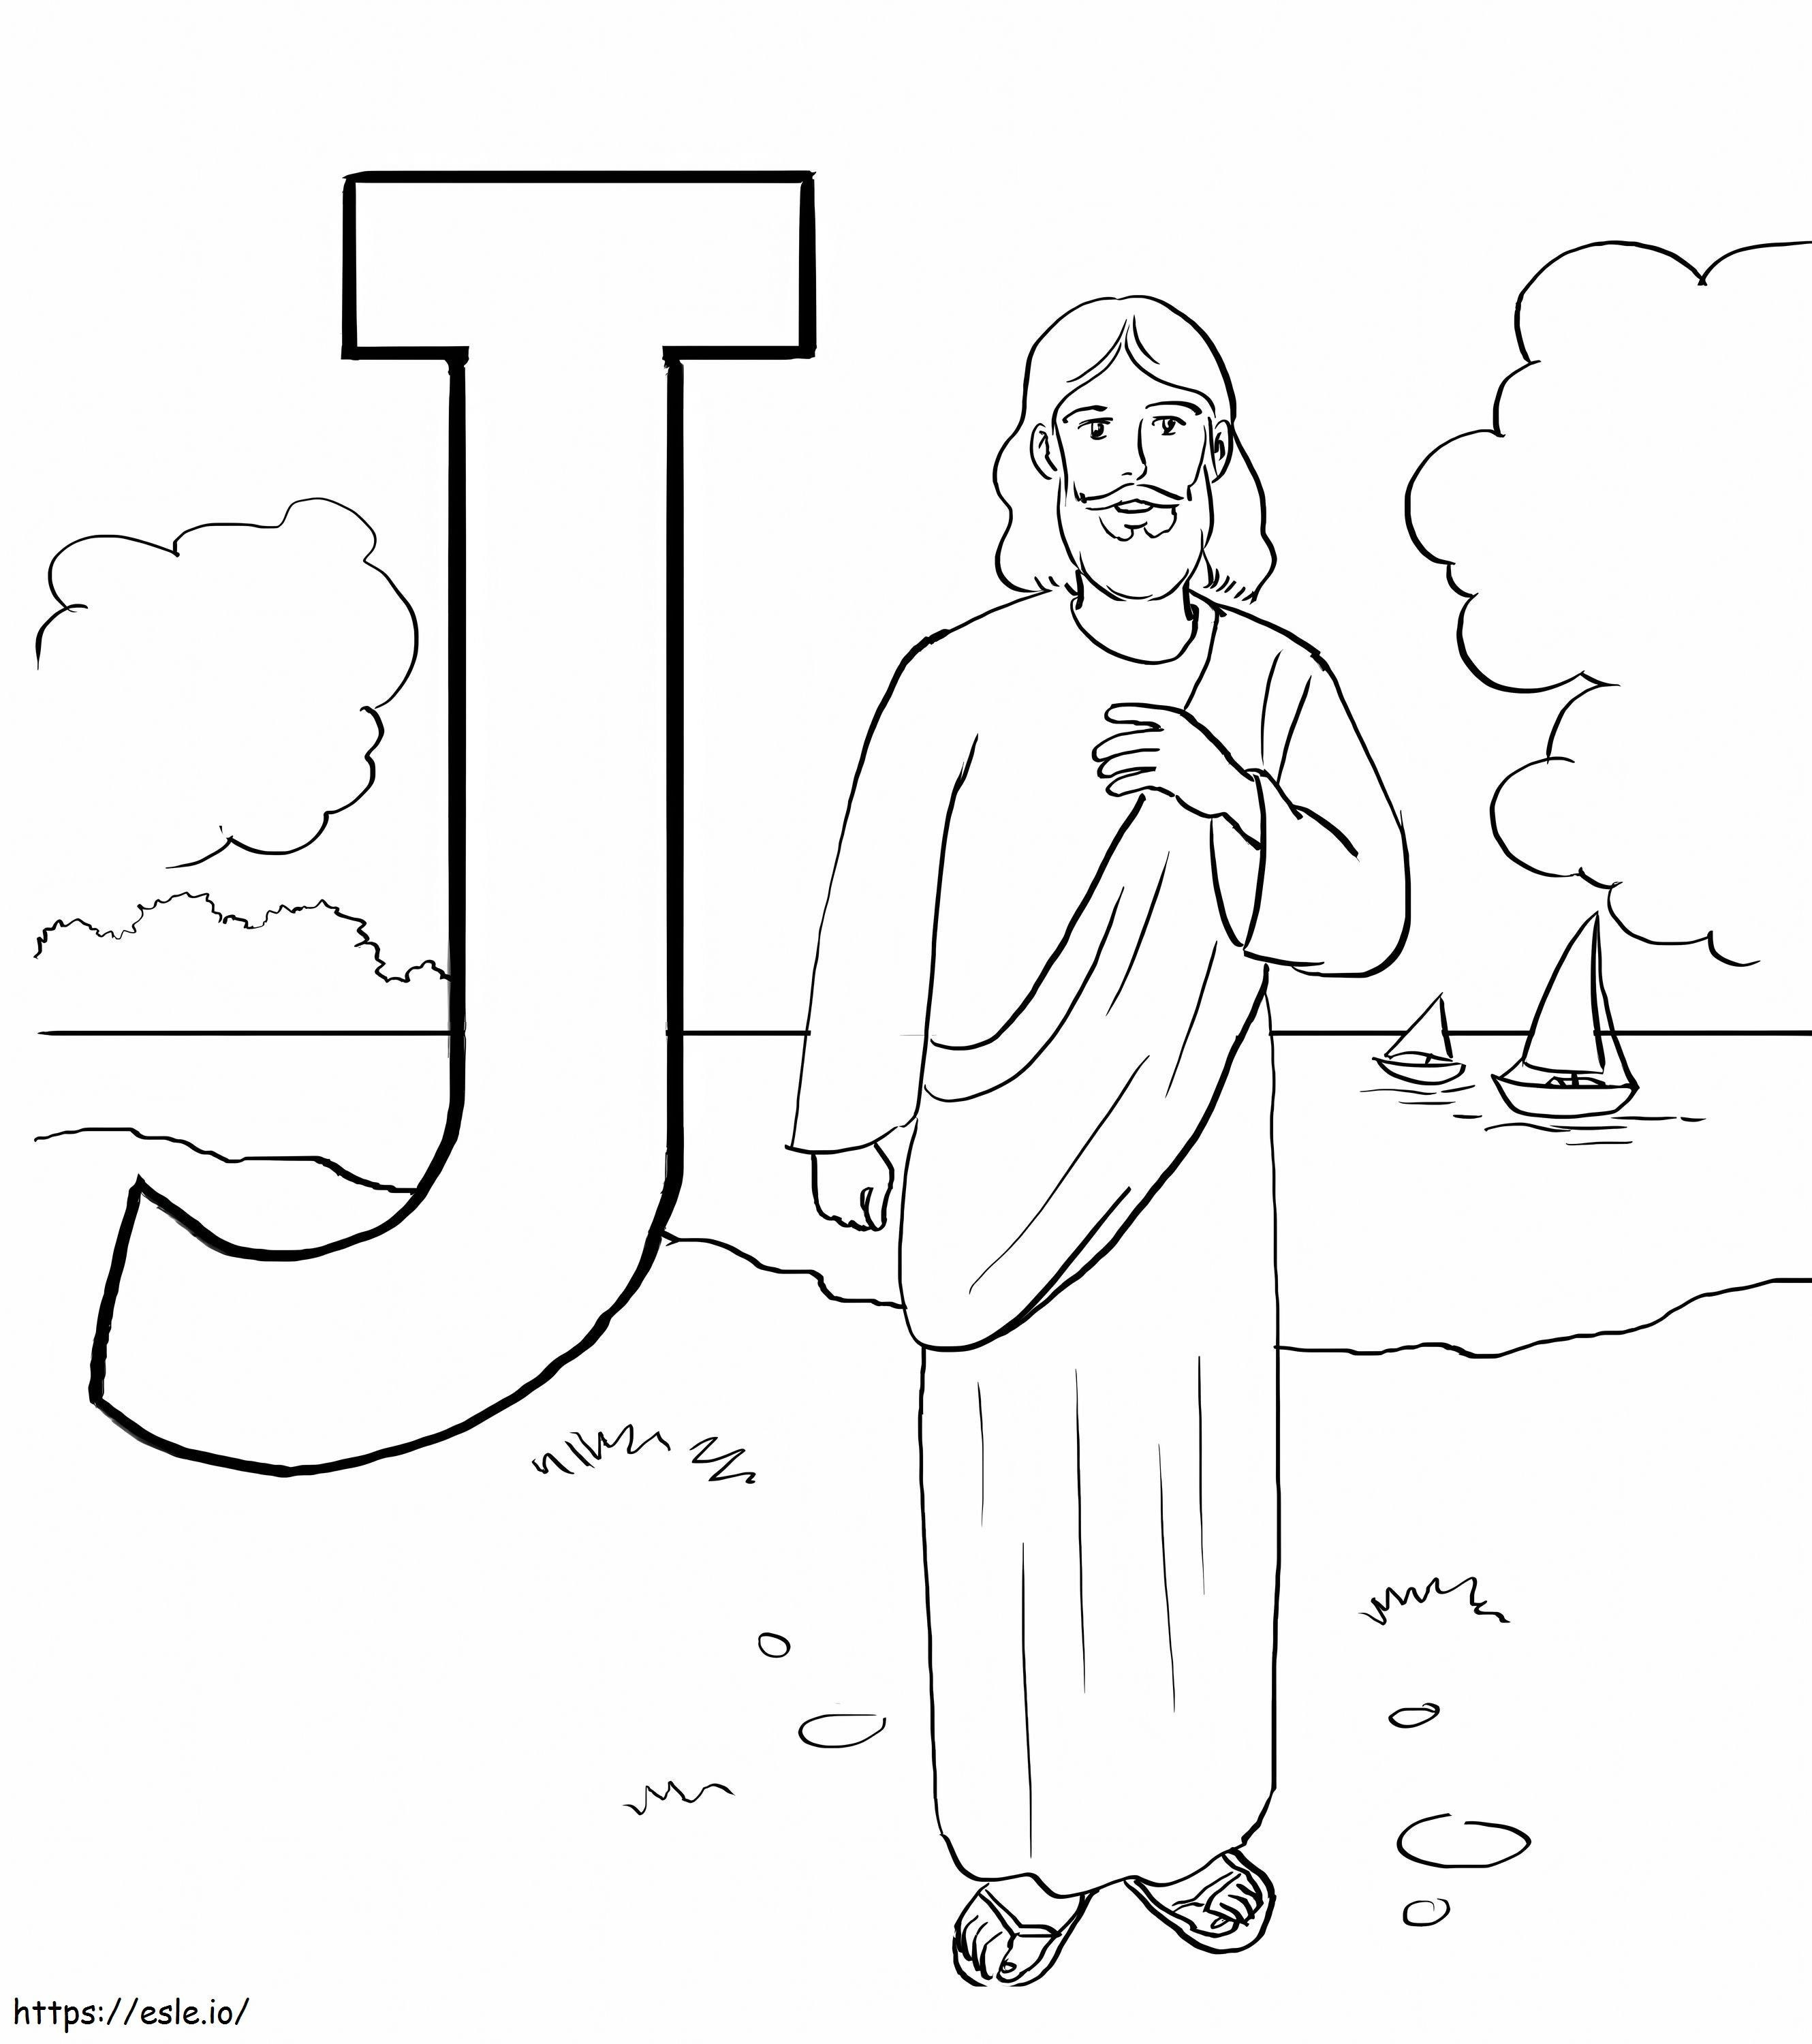 Letter J With Jesus coloring page